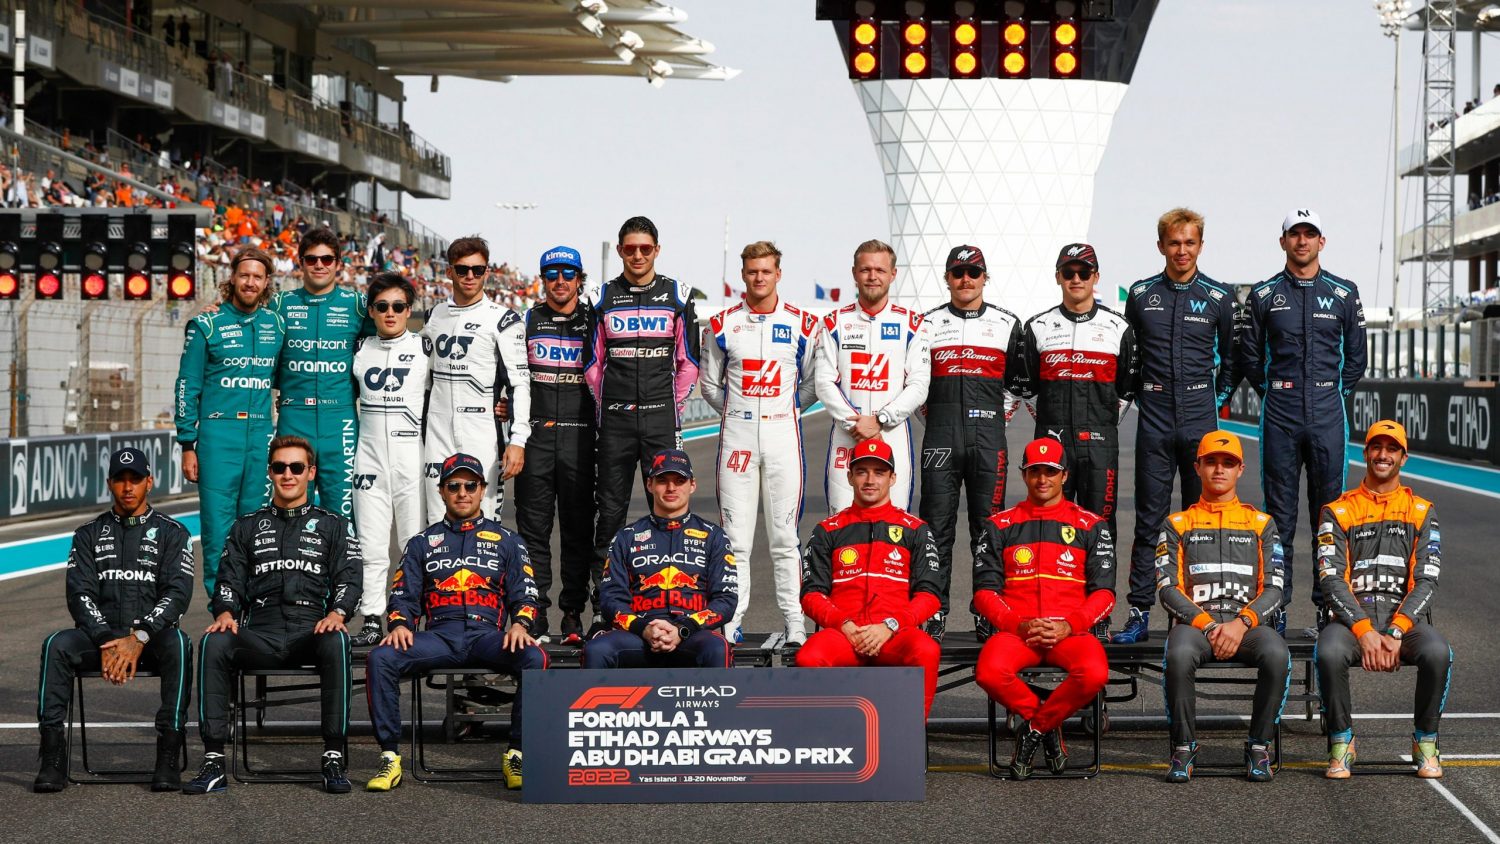 Abu Dhabi GP Sundays action in pictures